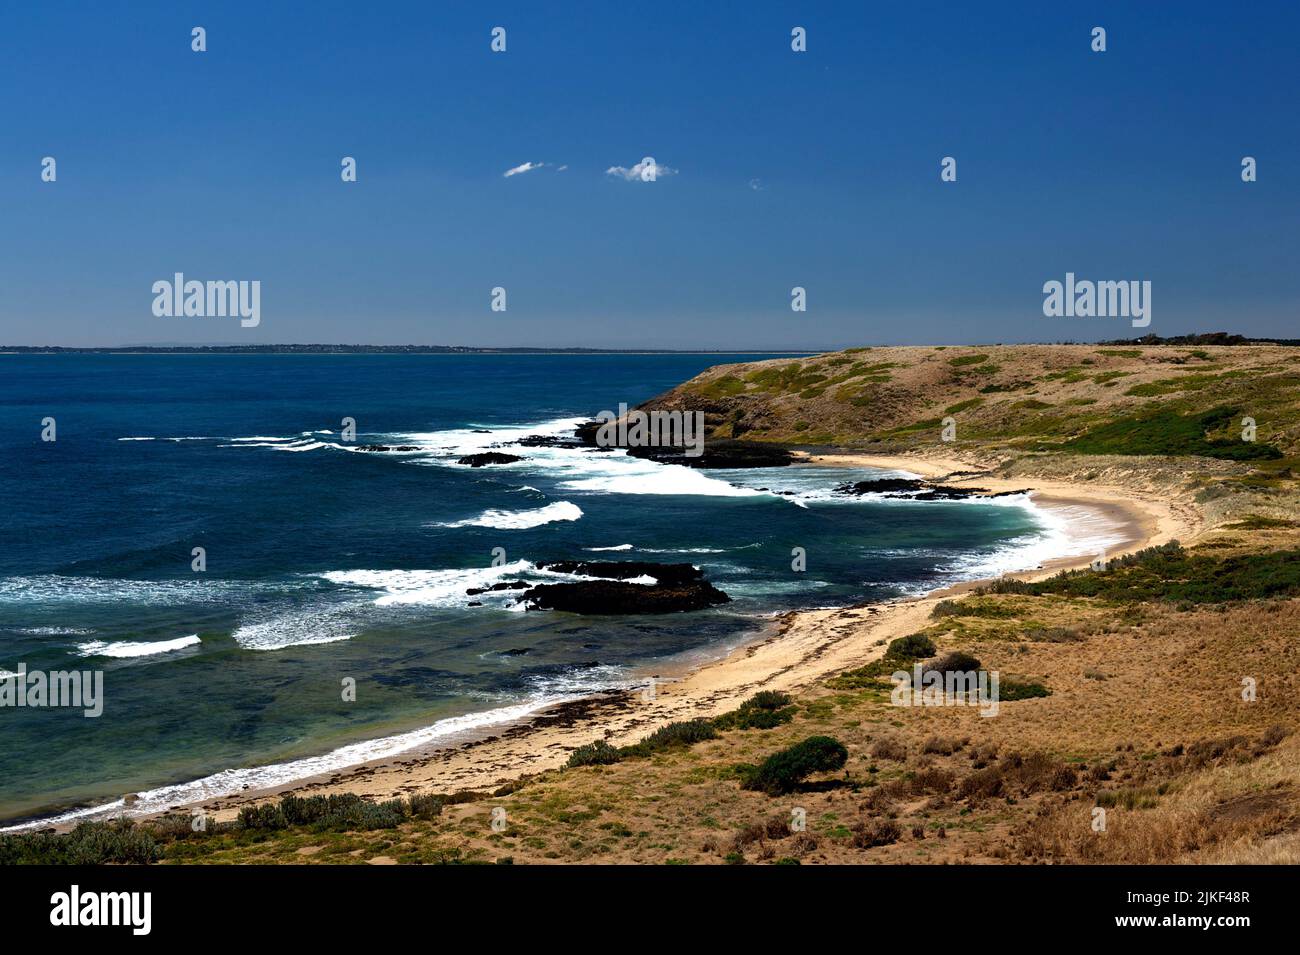 The sun shines on a deserted beach at Cowrie Bay on Phillip Island in Victoria, Australia, just a few days after the school holidays. Stock Photo